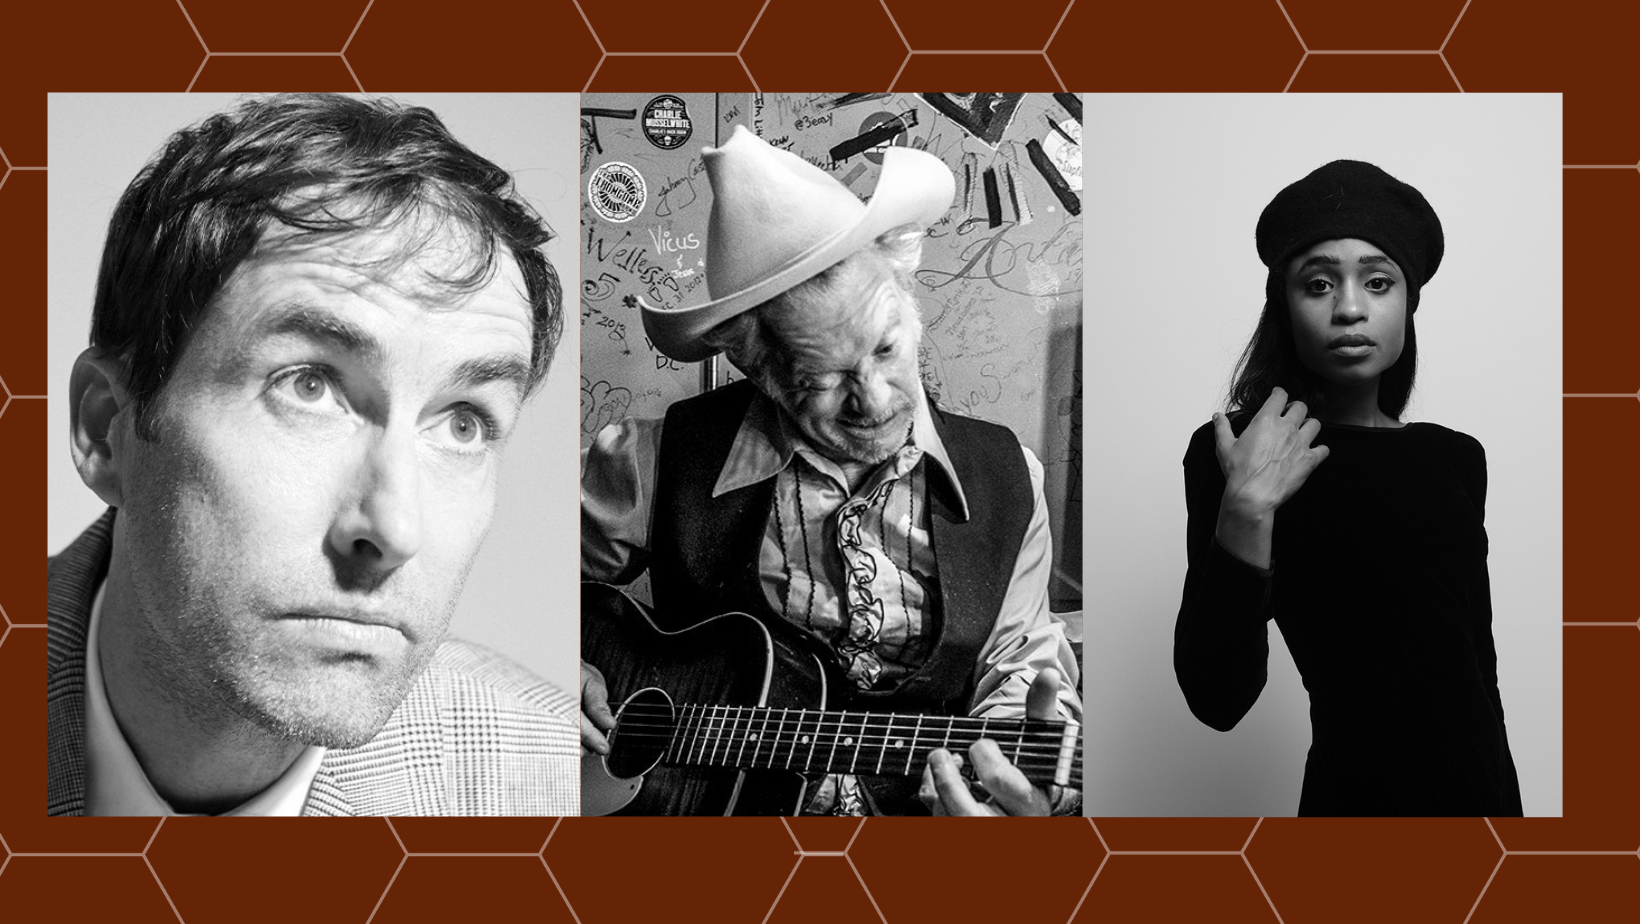 The Park City Song Summit “redefines the live music experience.” Check out SLUG's concert review with Andrew Bird, Adia Victoria, and Jimbo Mathis.